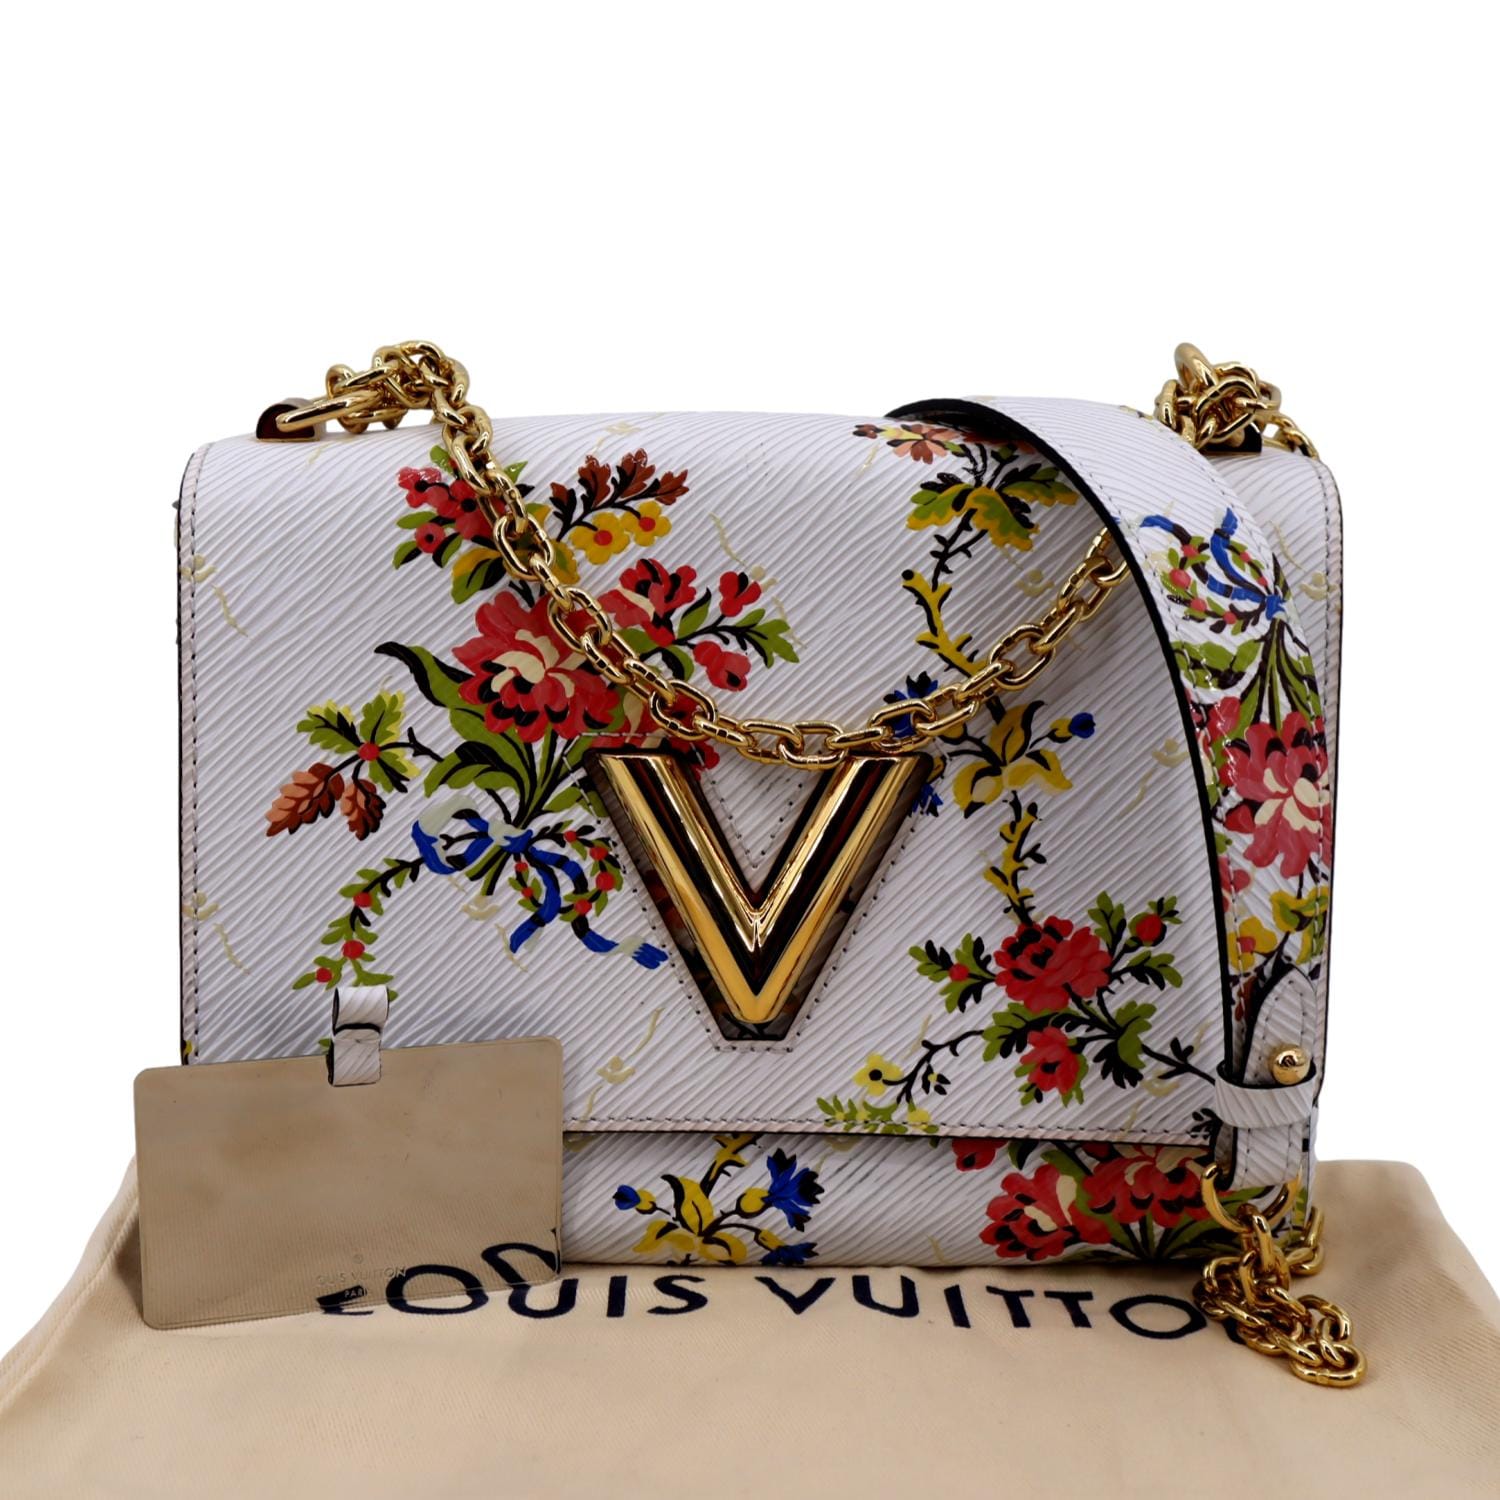 Leather Printed Louis Vuitton handbags for women